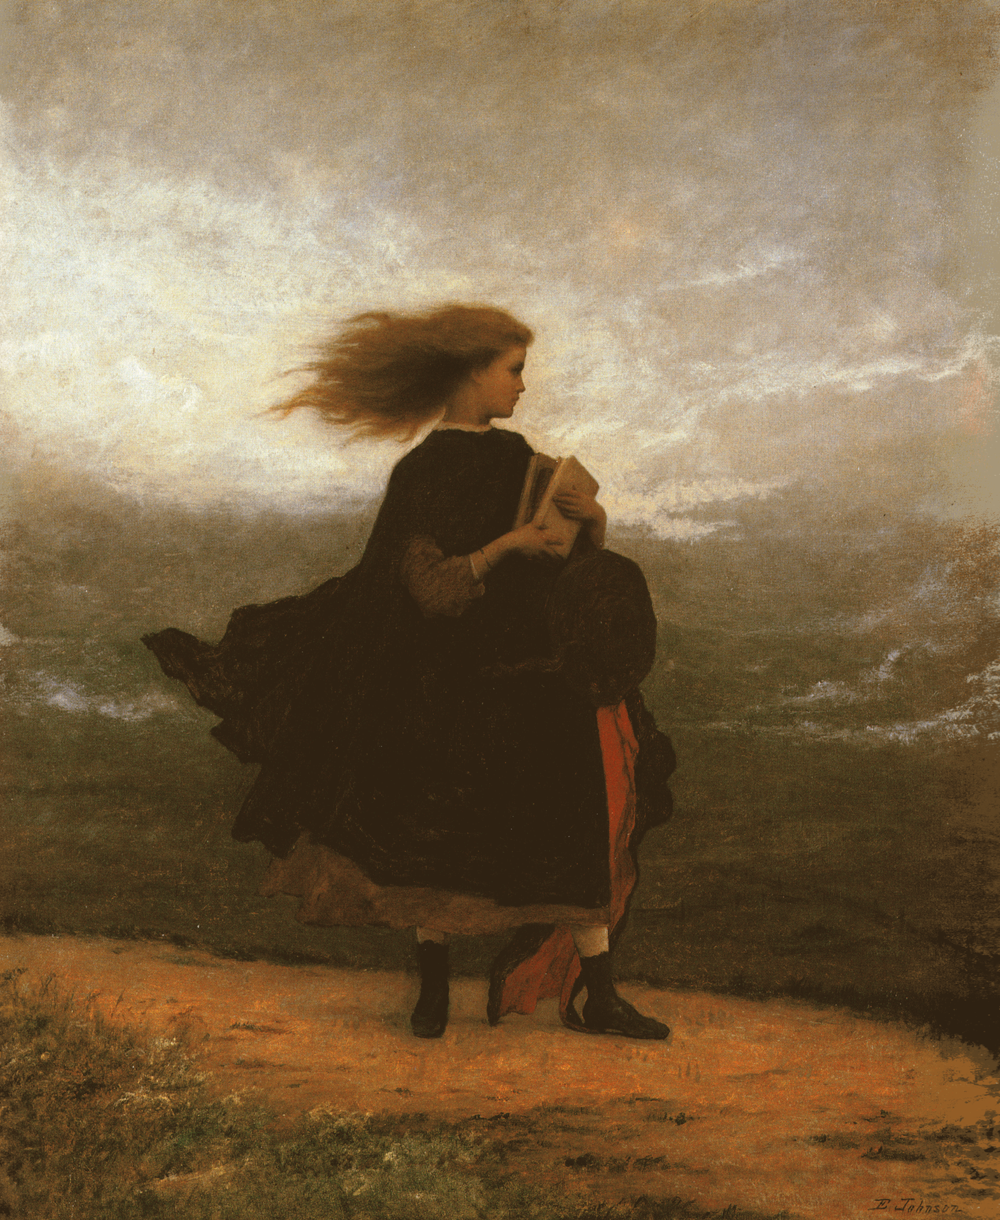 Inspiration: “The Girl I Left Behind Me,” by Eastman Johnson